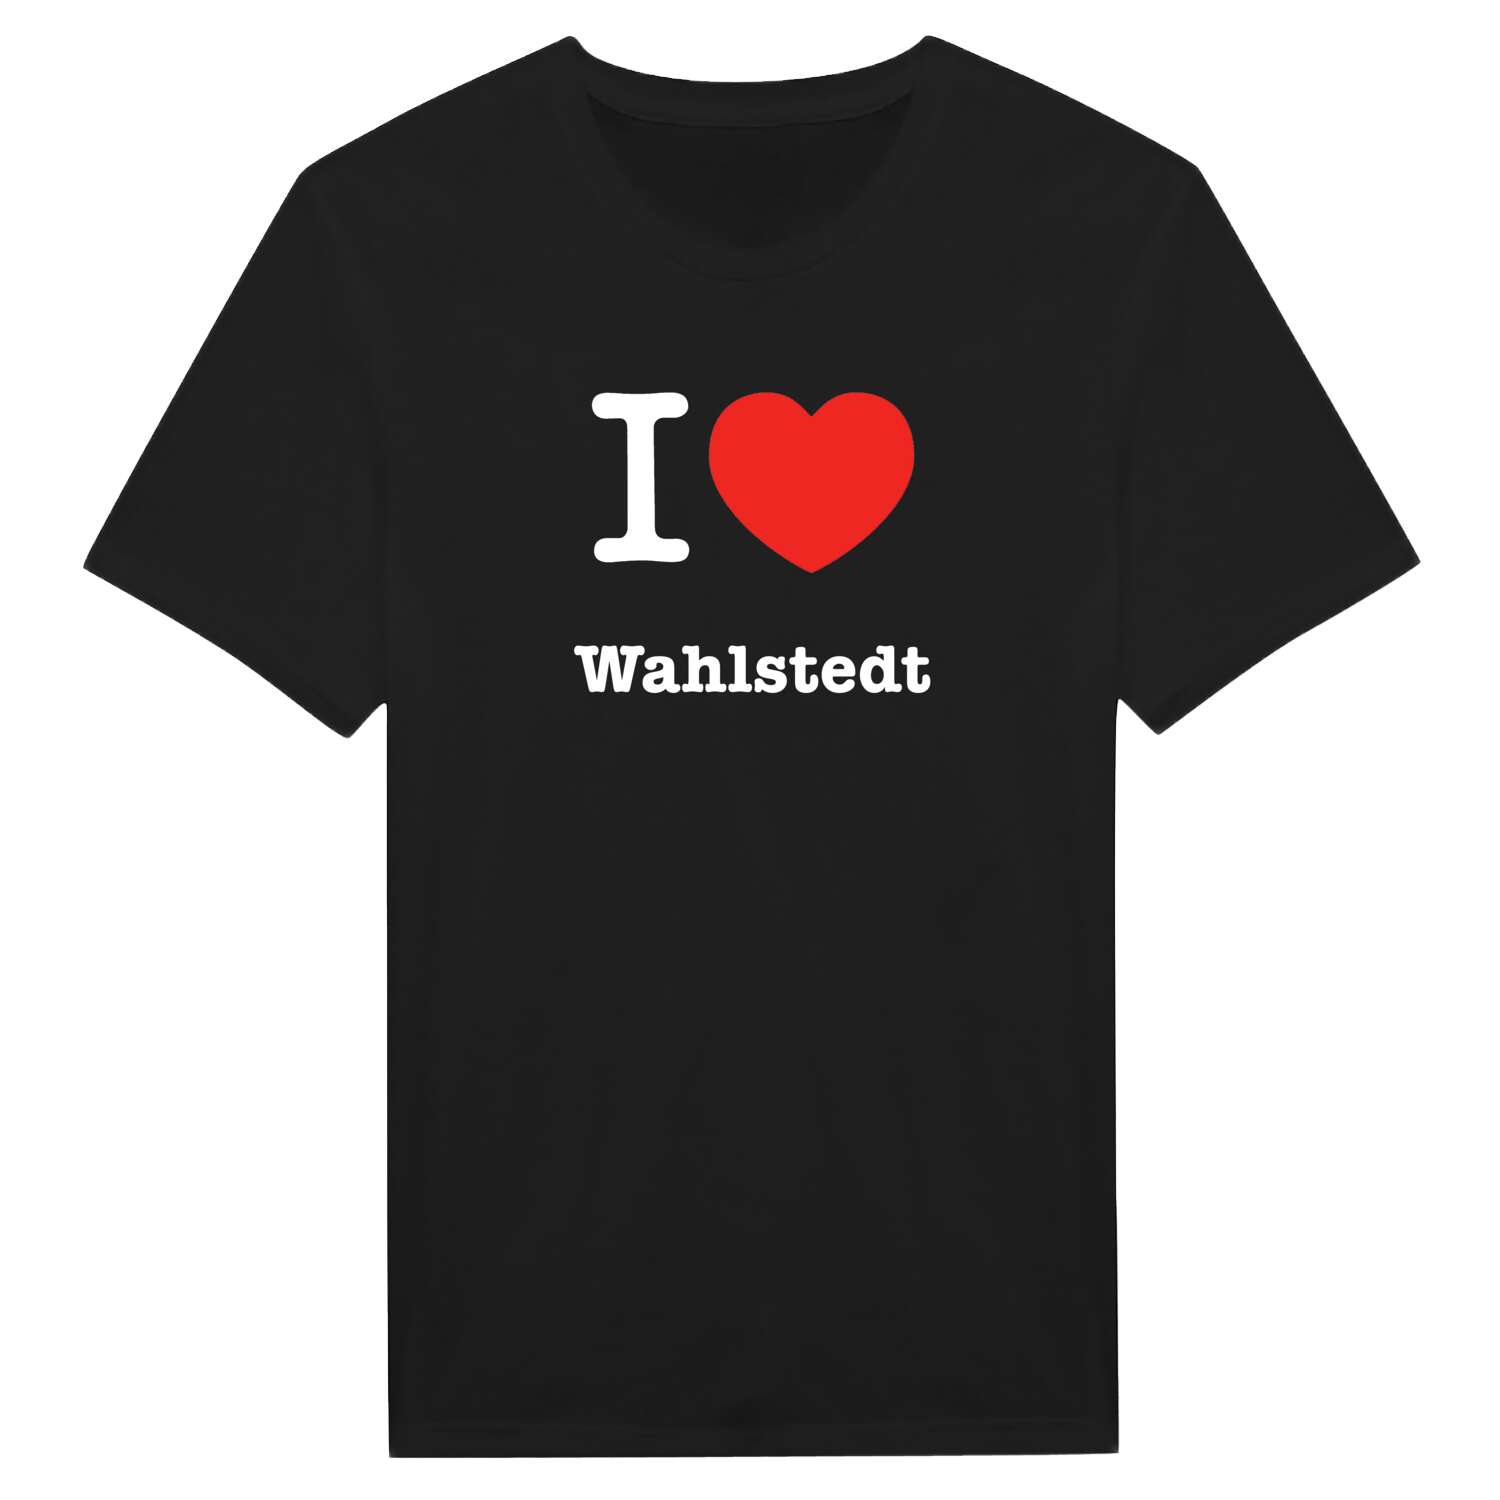 Wahlstedt T-Shirt »I love«